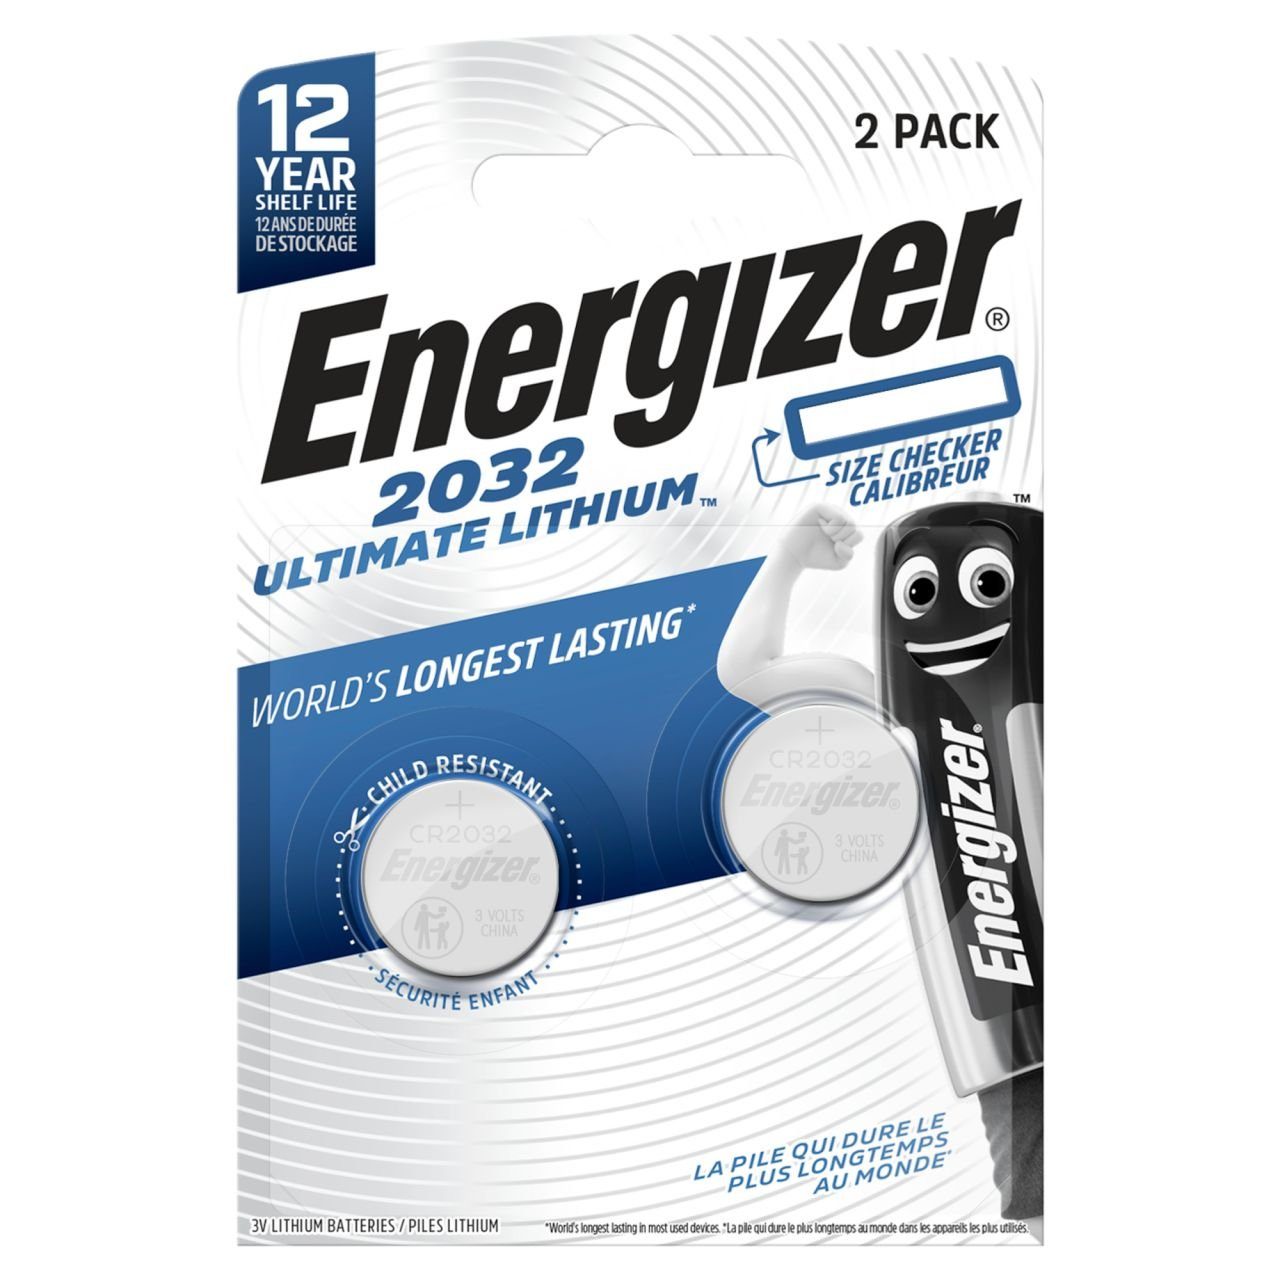 Knopfzelle Energizer Batterie Ultimate Energizer CR 2032 3 Lithium,